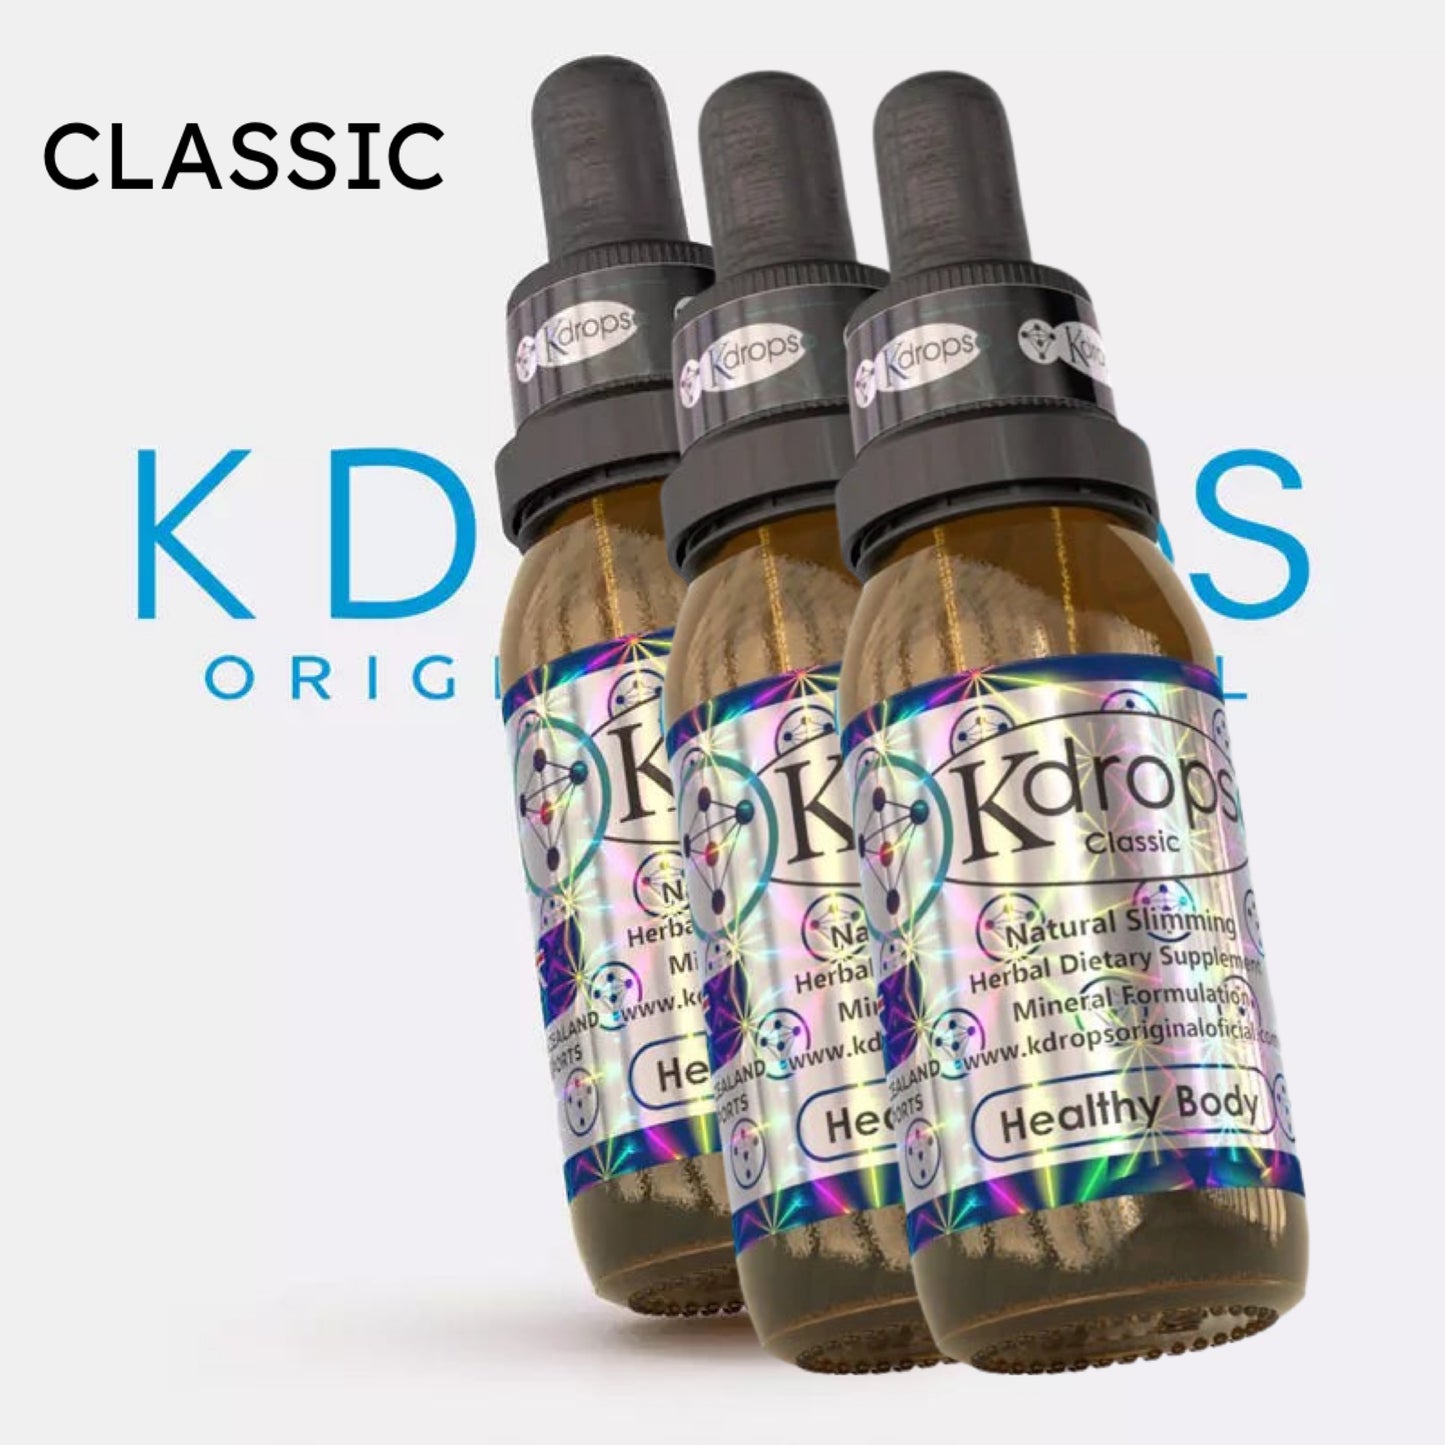 KDROPS CLASSIC- Burn Fat AND LOSE WEIGHT 